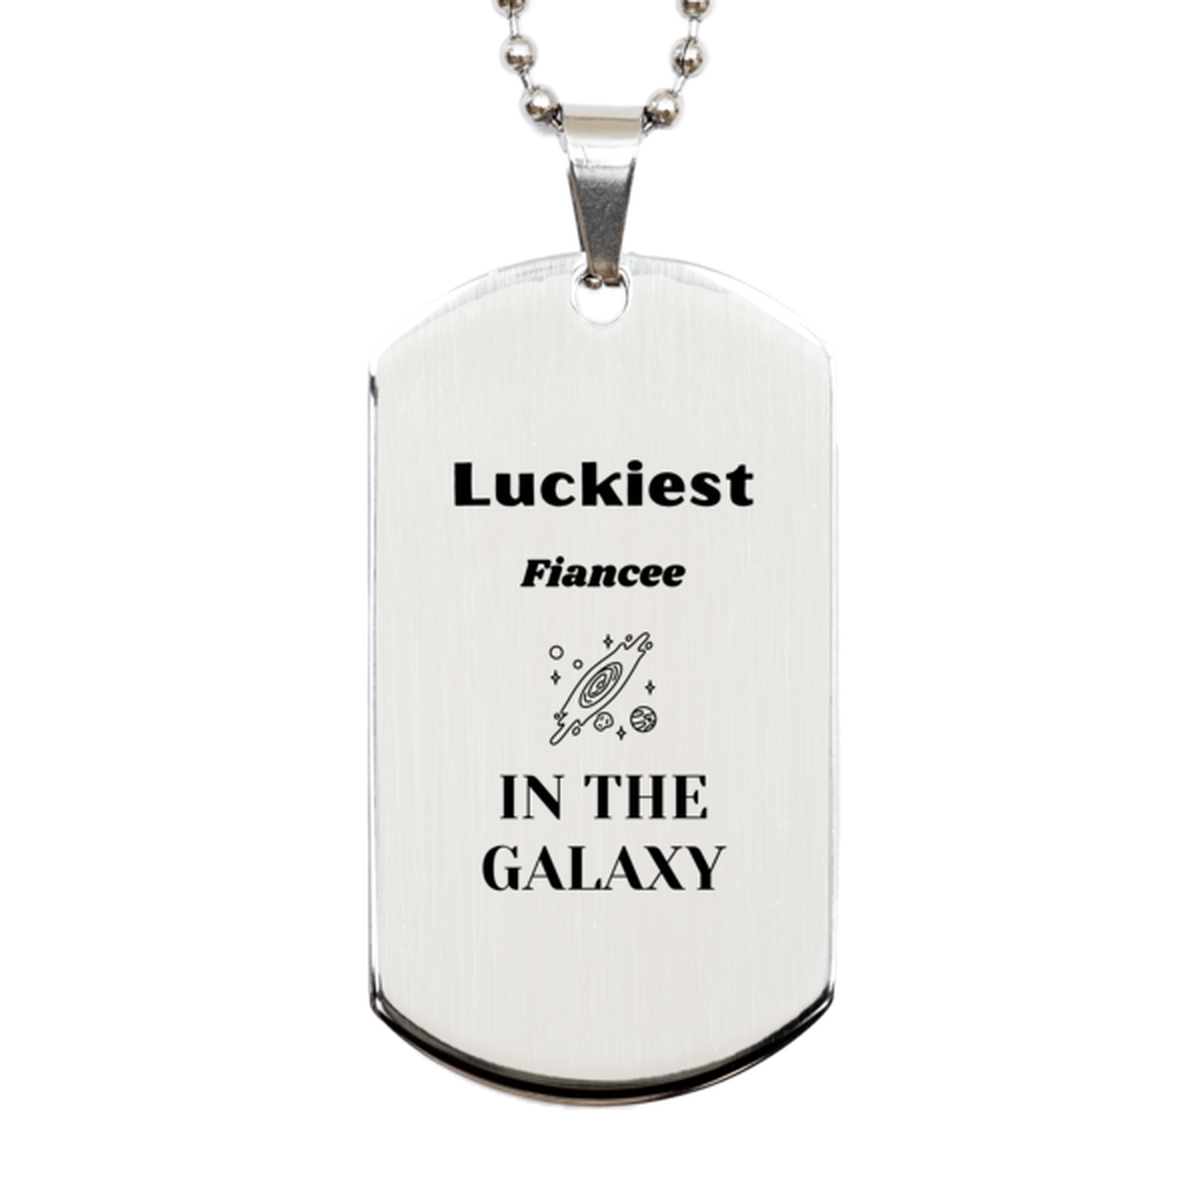 Luckiest Fiancee in the Galaxy, To My Fiancee Engraved Gifts, Christmas Fiancee Silver Dog Tag Gifts, X-mas Birthday Unique Gifts For Fiancee Men Women